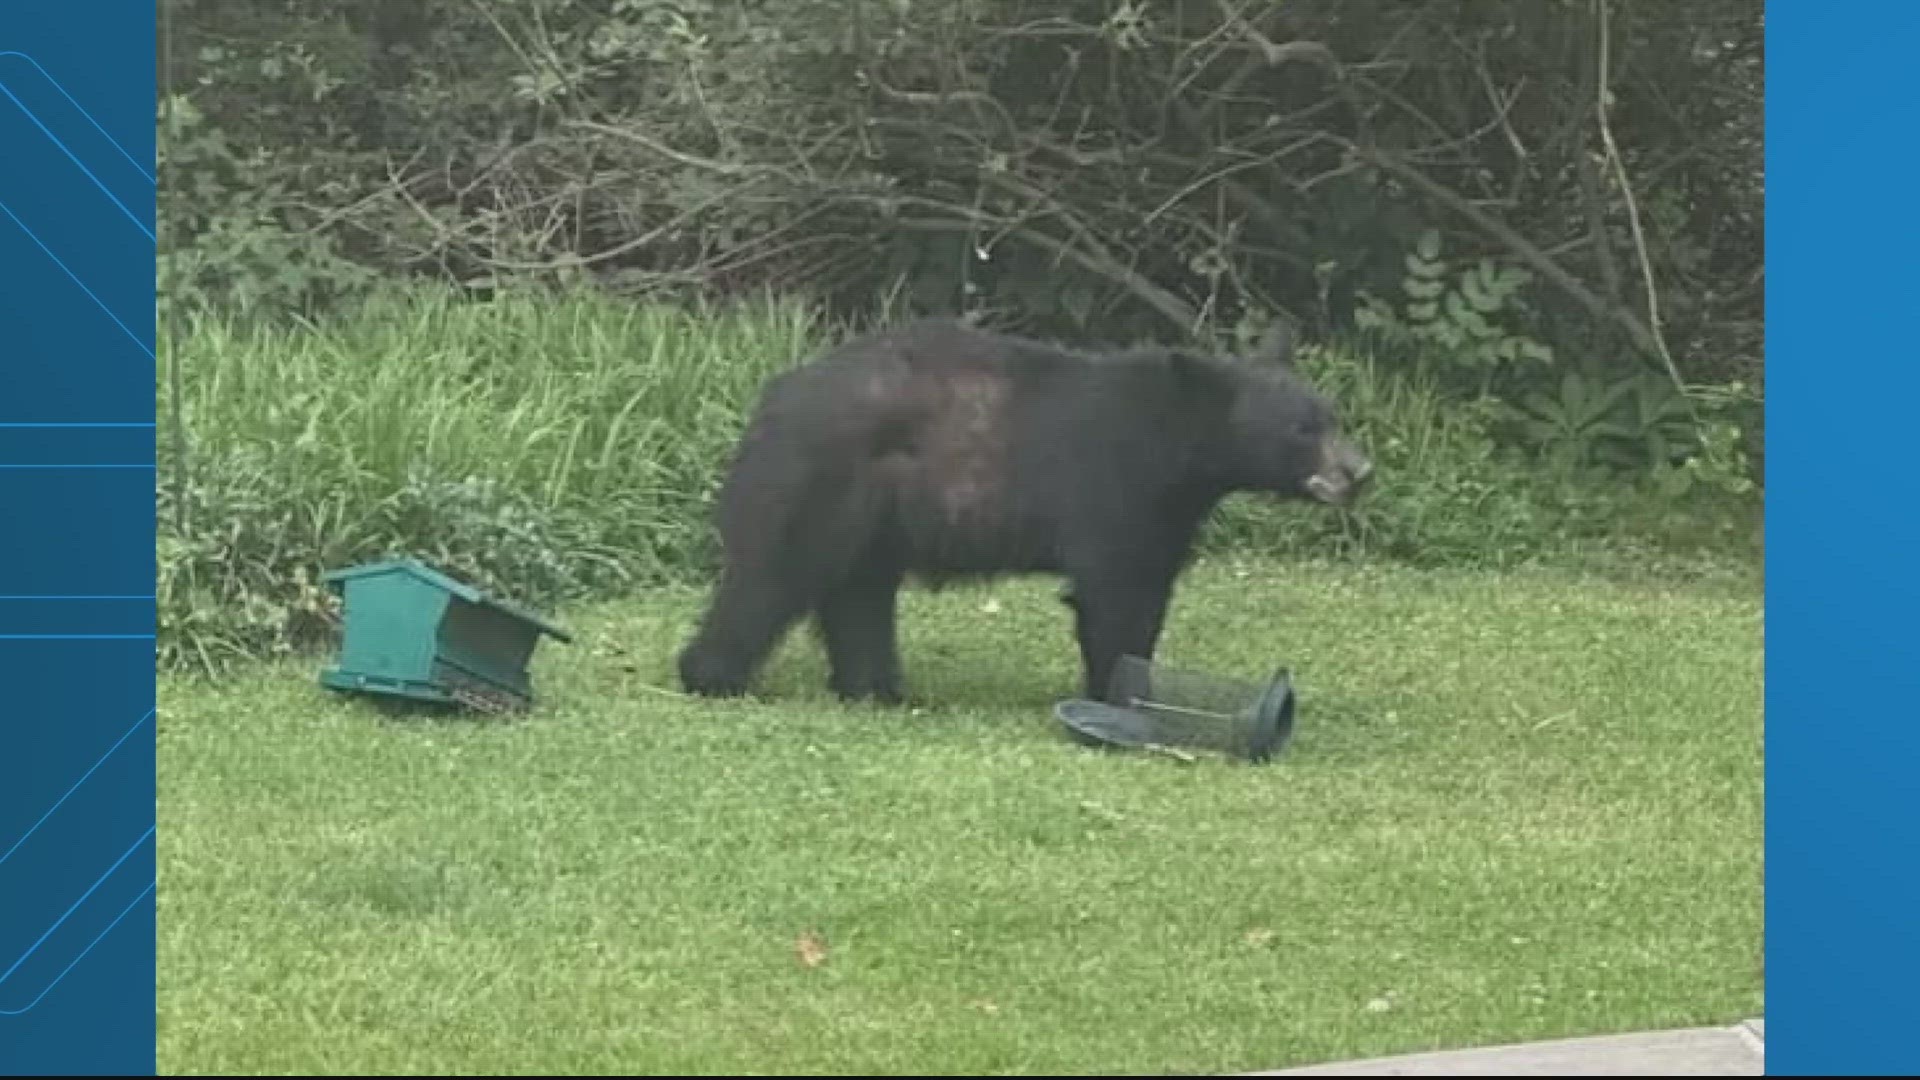 A black bear was spotted this morning in Prince George's County. People reported seeing the bear in both the Hyattsville and University Park areas.